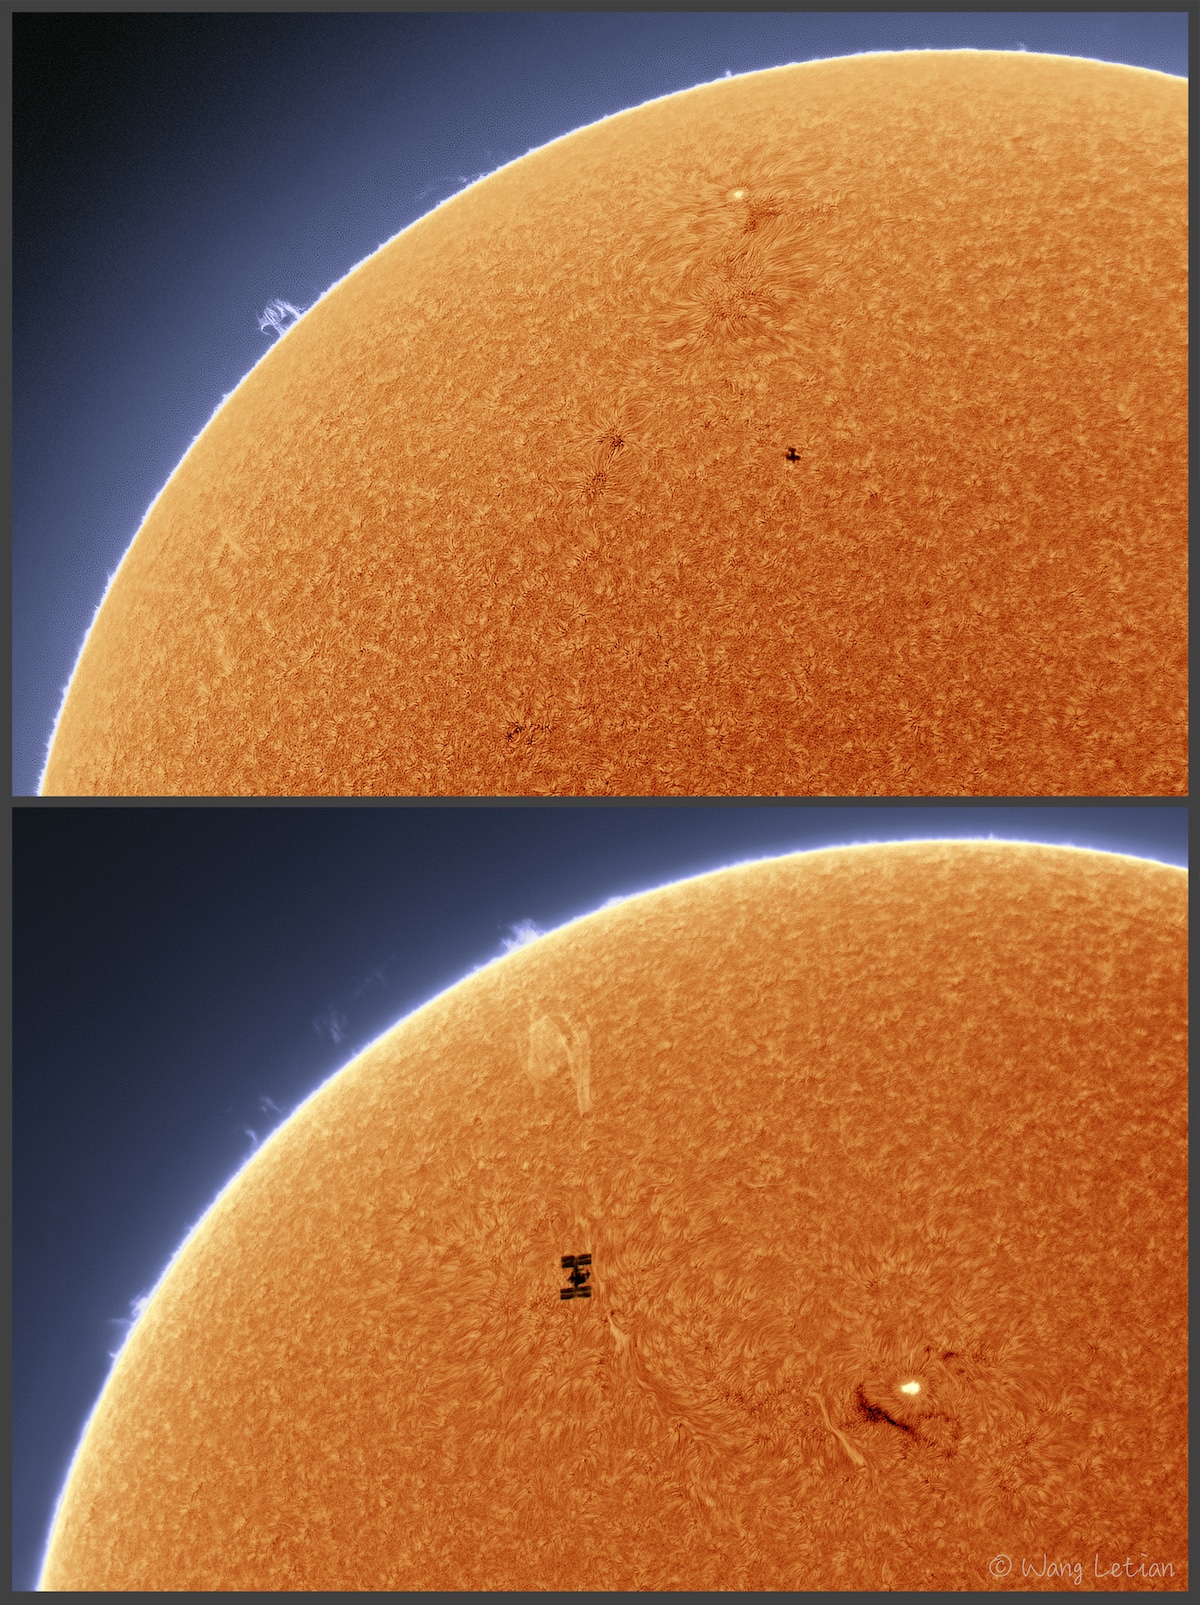 ISS and CSS Transiting the Sun